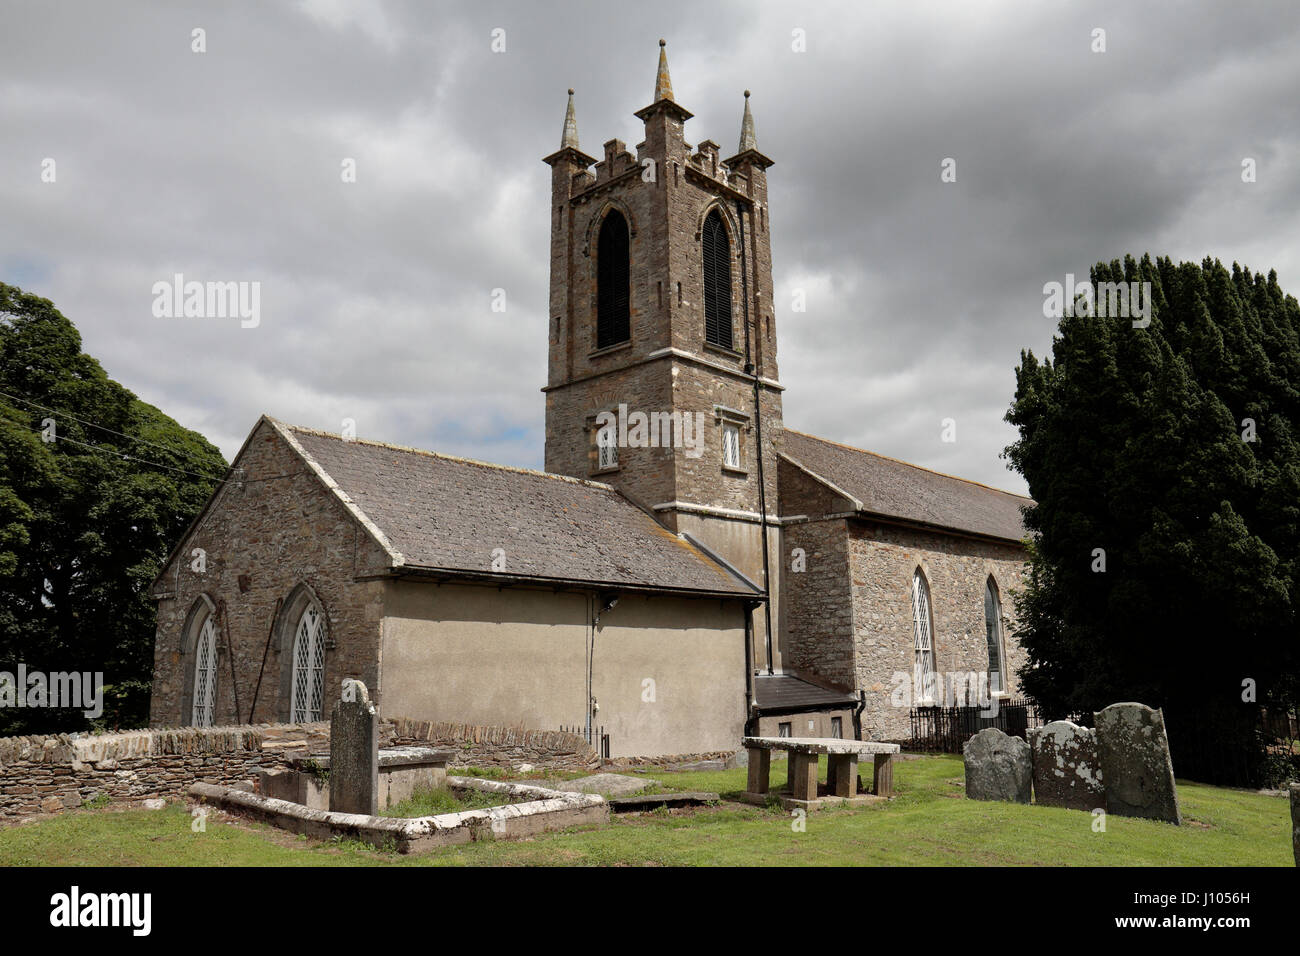 Die Cathedral Church of St Edan, Church of Ireland in Ferns, County Wexford, Irland (Eire). Stockfoto